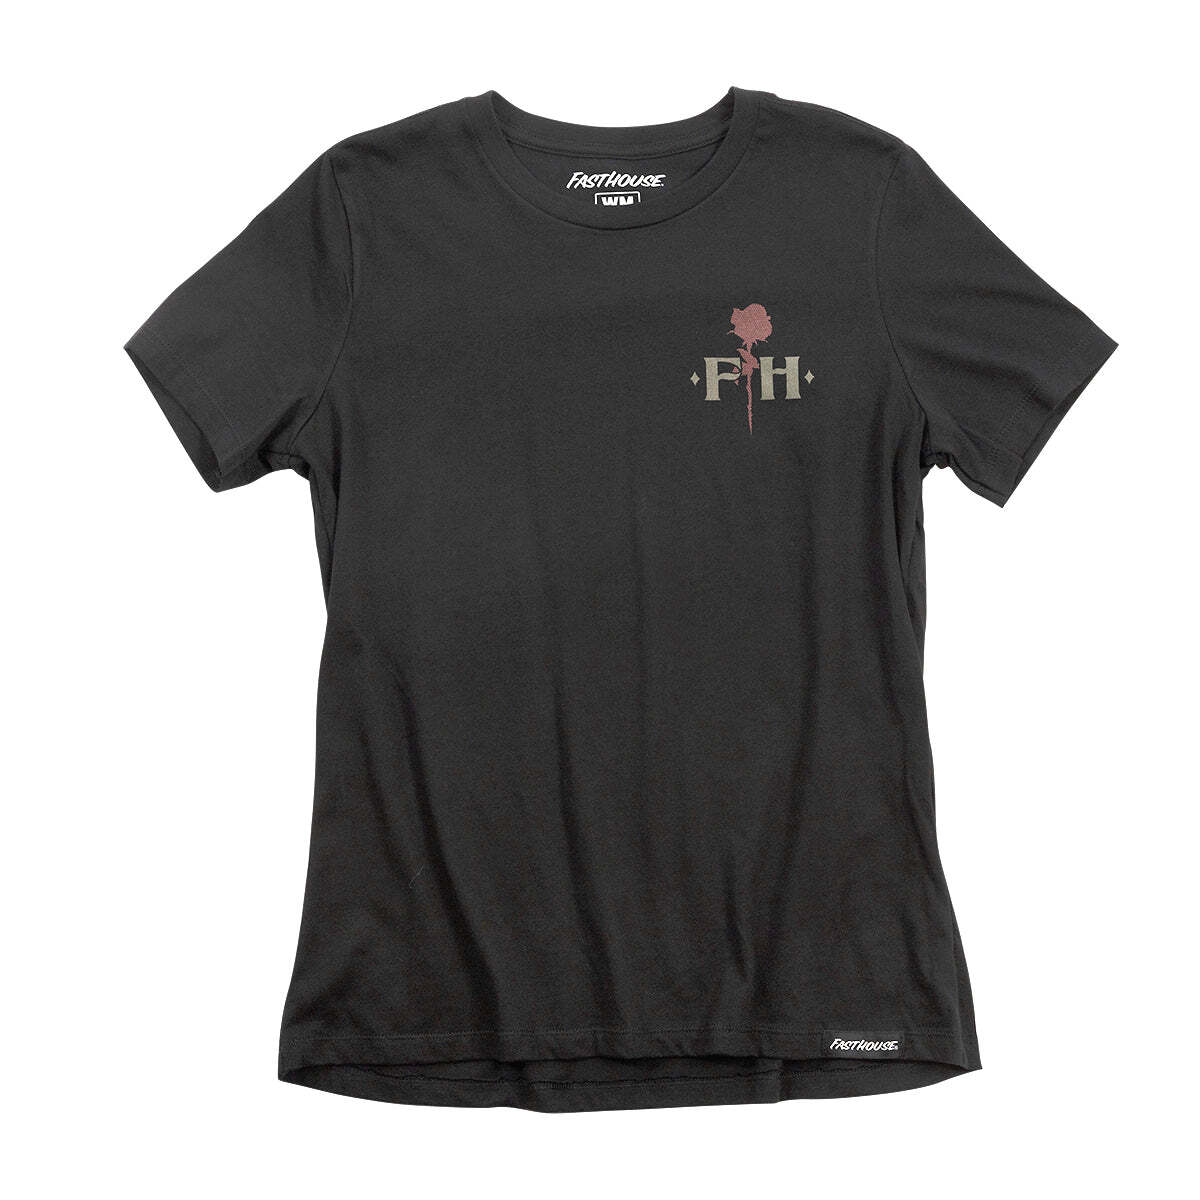 Fasthouse Womens Vision Tee - Black - FASTHOUSE